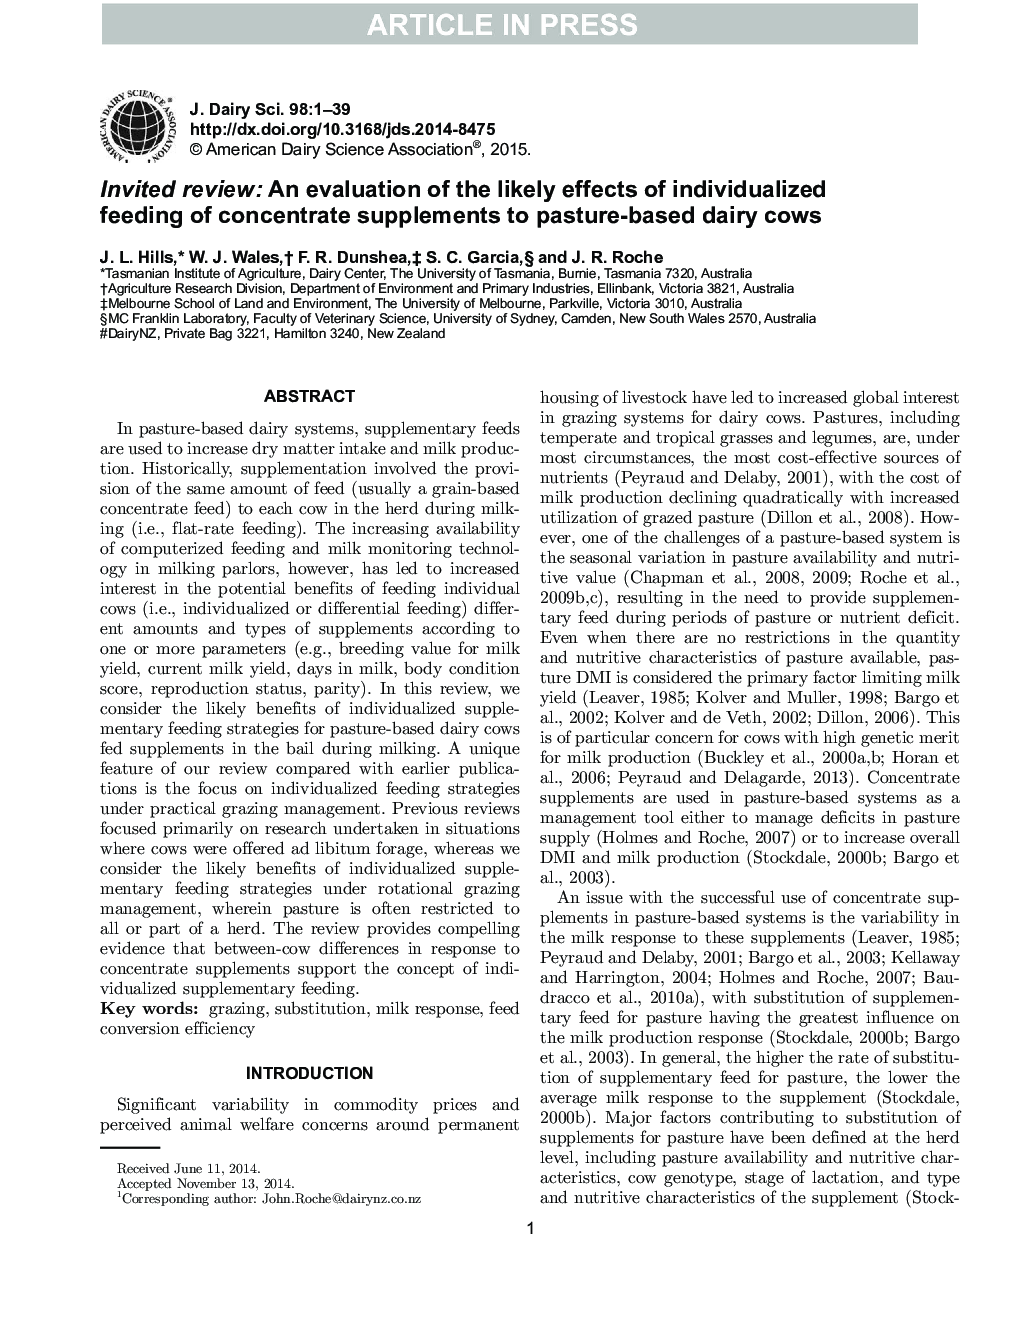 Invited review: An evaluation of the likely effects of individualized feeding of concentrate supplements to pasture-based dairy cows